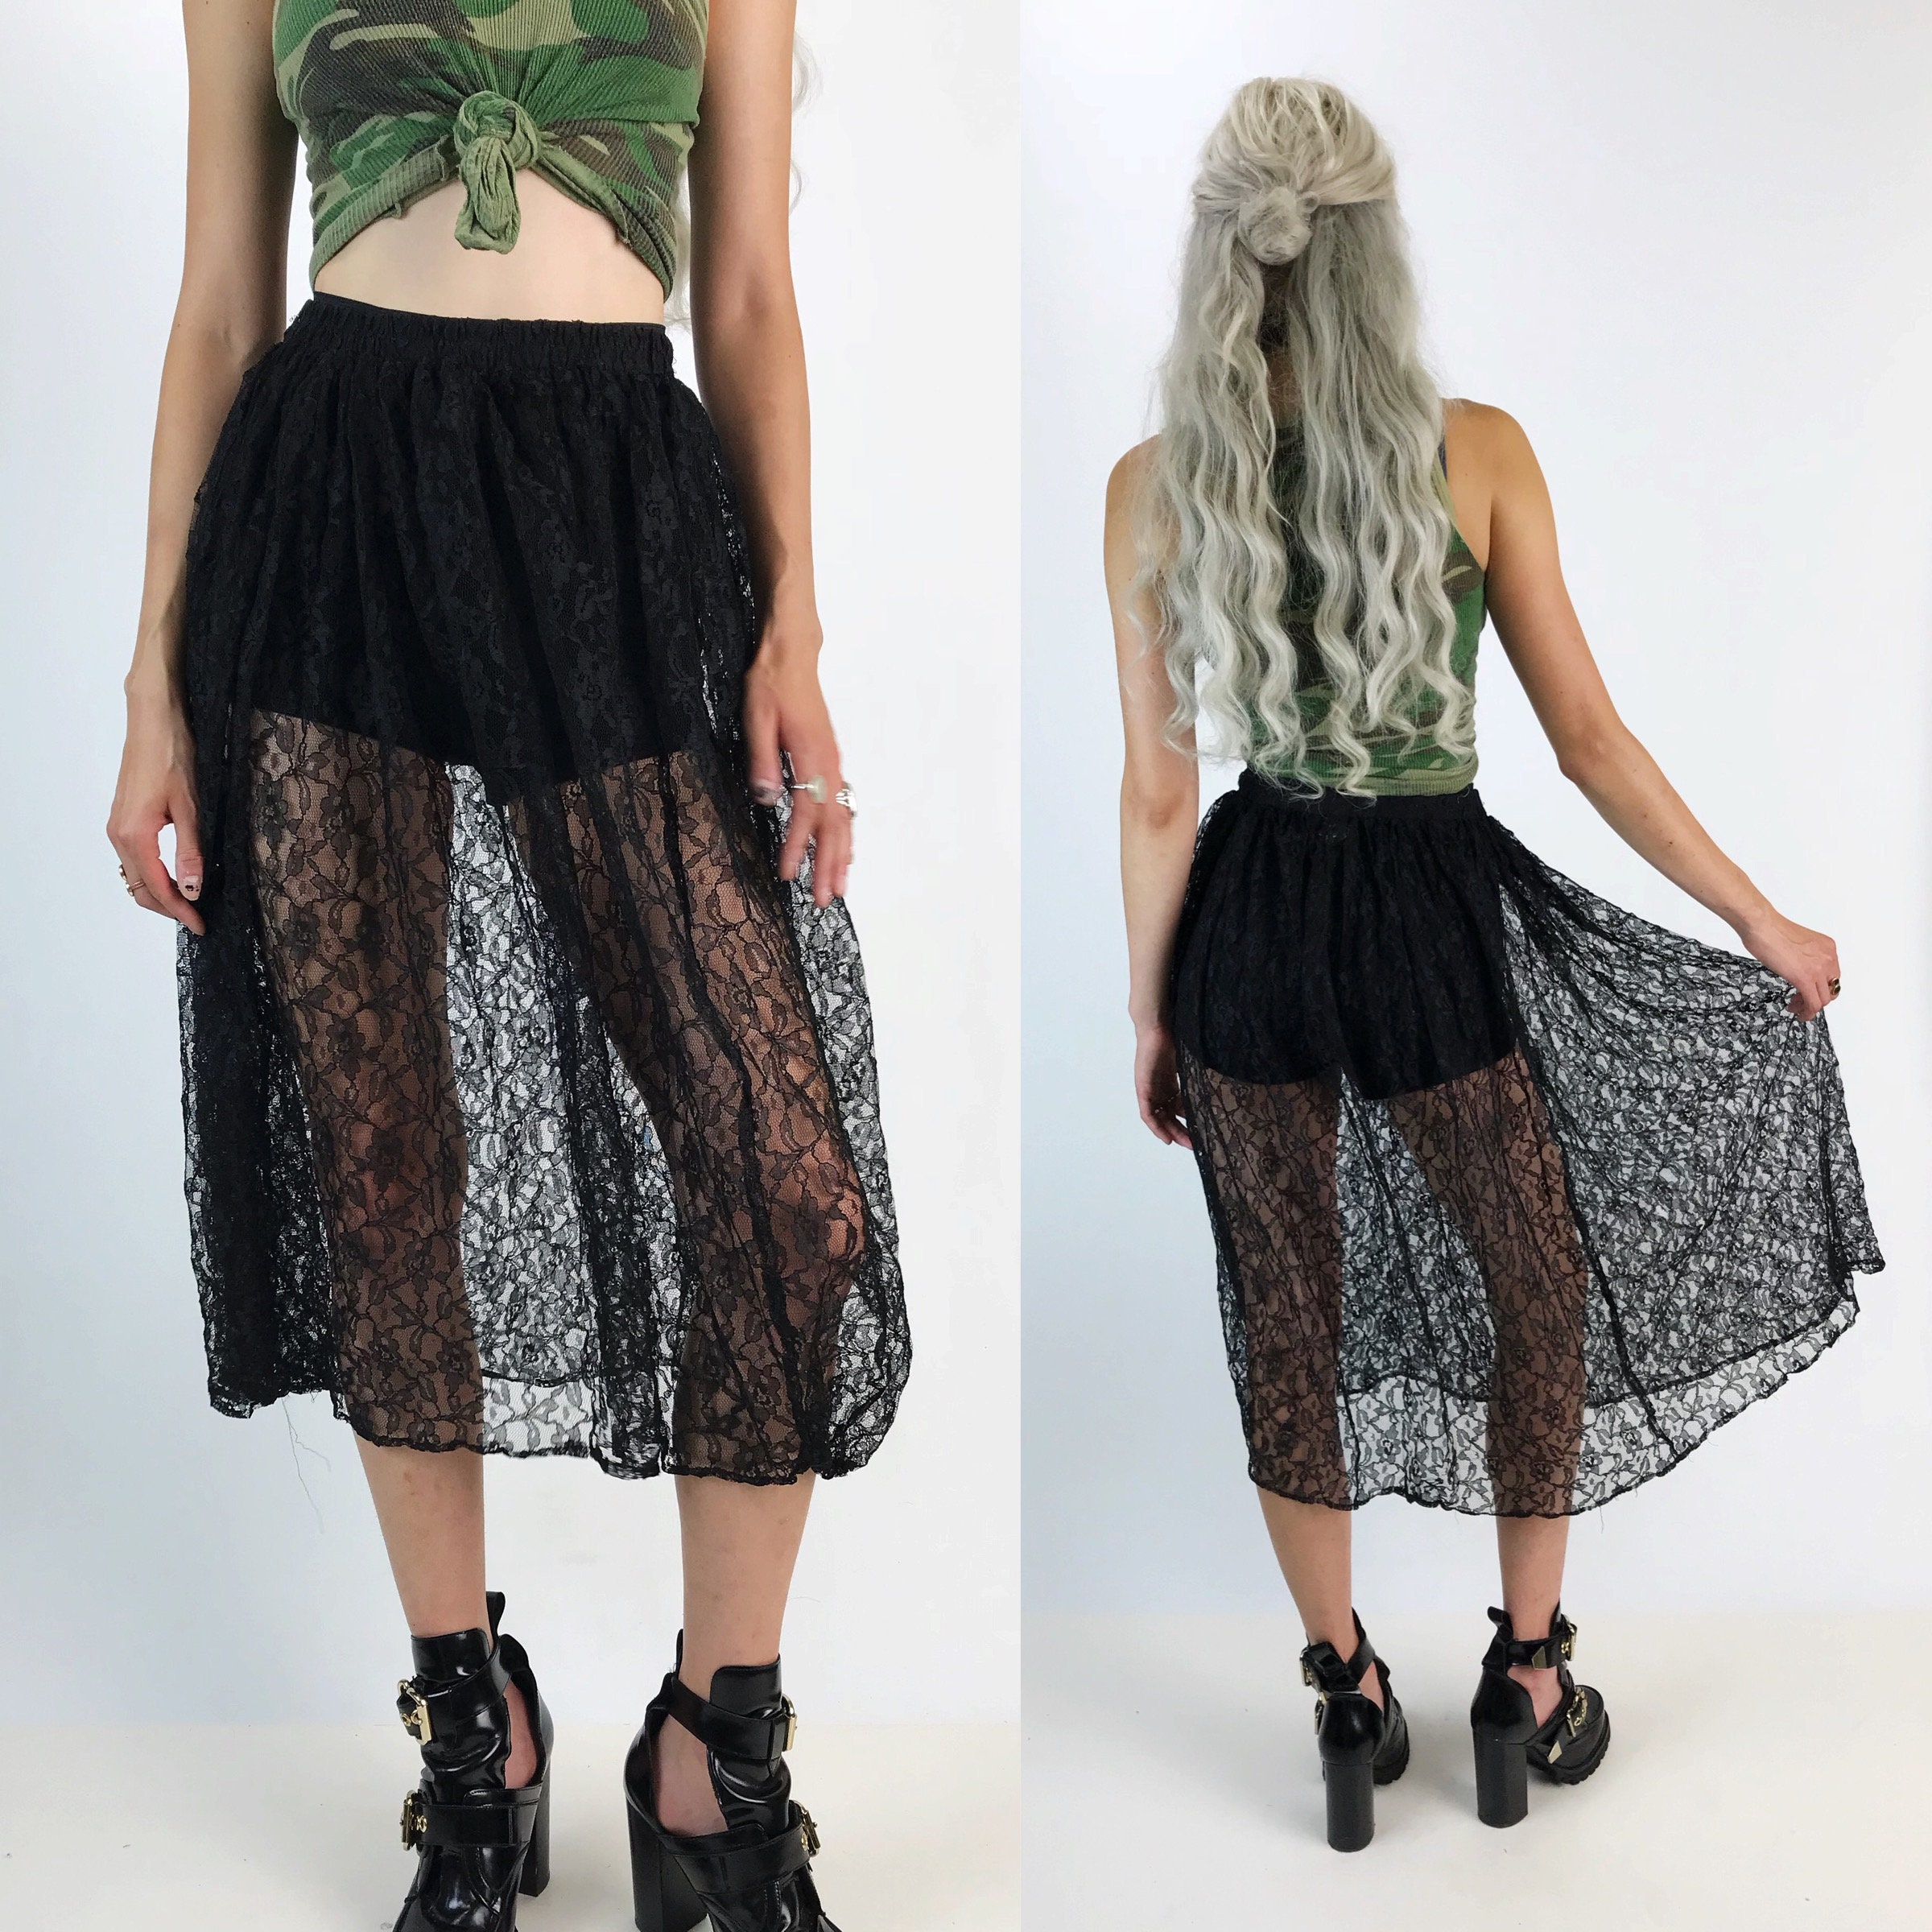 lace skirt with shorts underneath